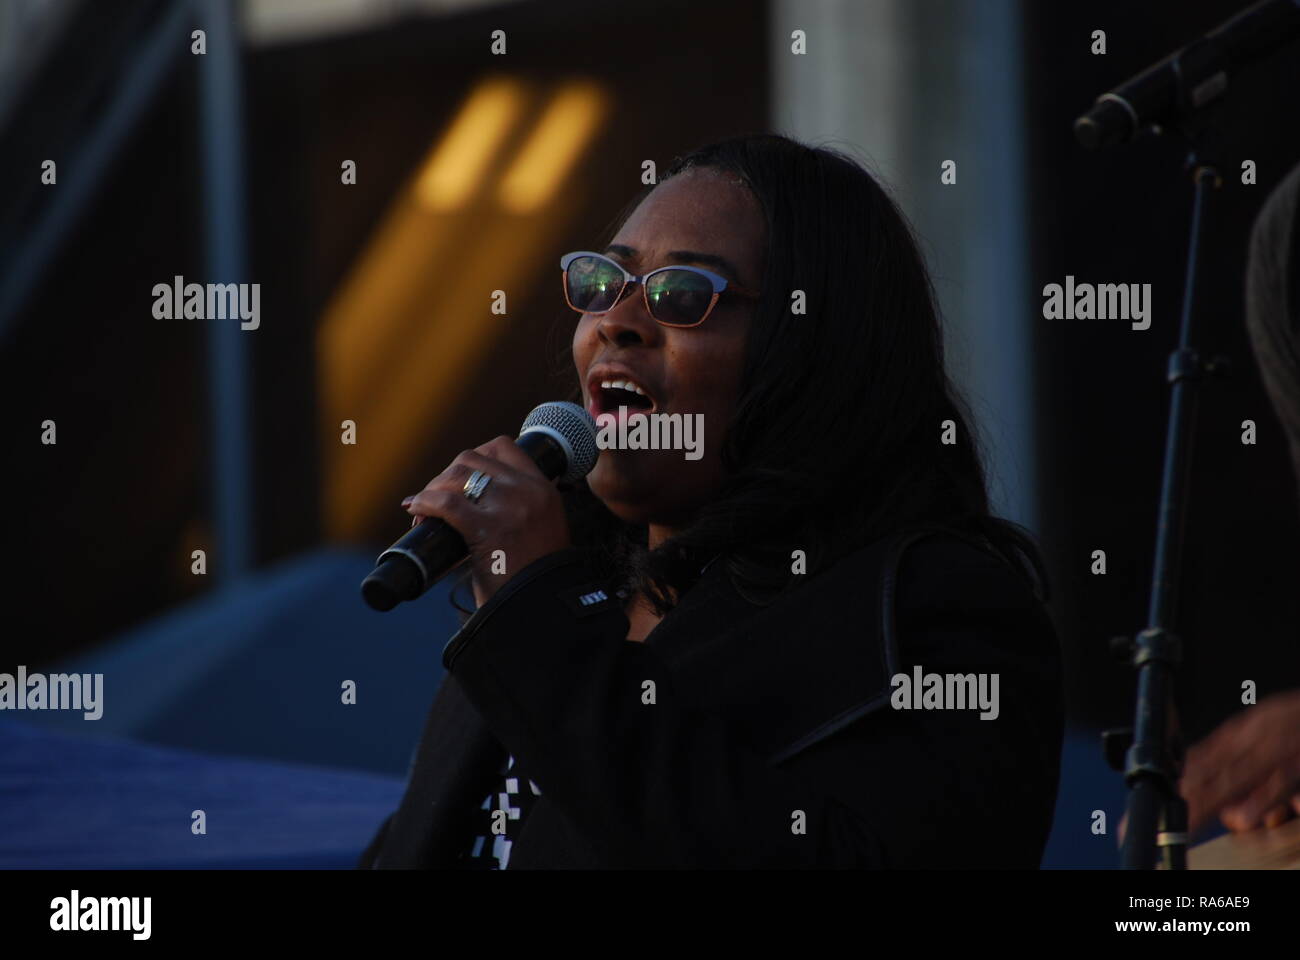 Oakland, California, USA. 1st Jan, 2019. Oscar Grant's mother, Wanda Johnson, sings at a vigil outside the Fruitvale BART station in Oakland, California, marking the tenth anniversary since he was shot and killed by a police officer. Credit: Scott Morris/Alamy Live News Stock Photo